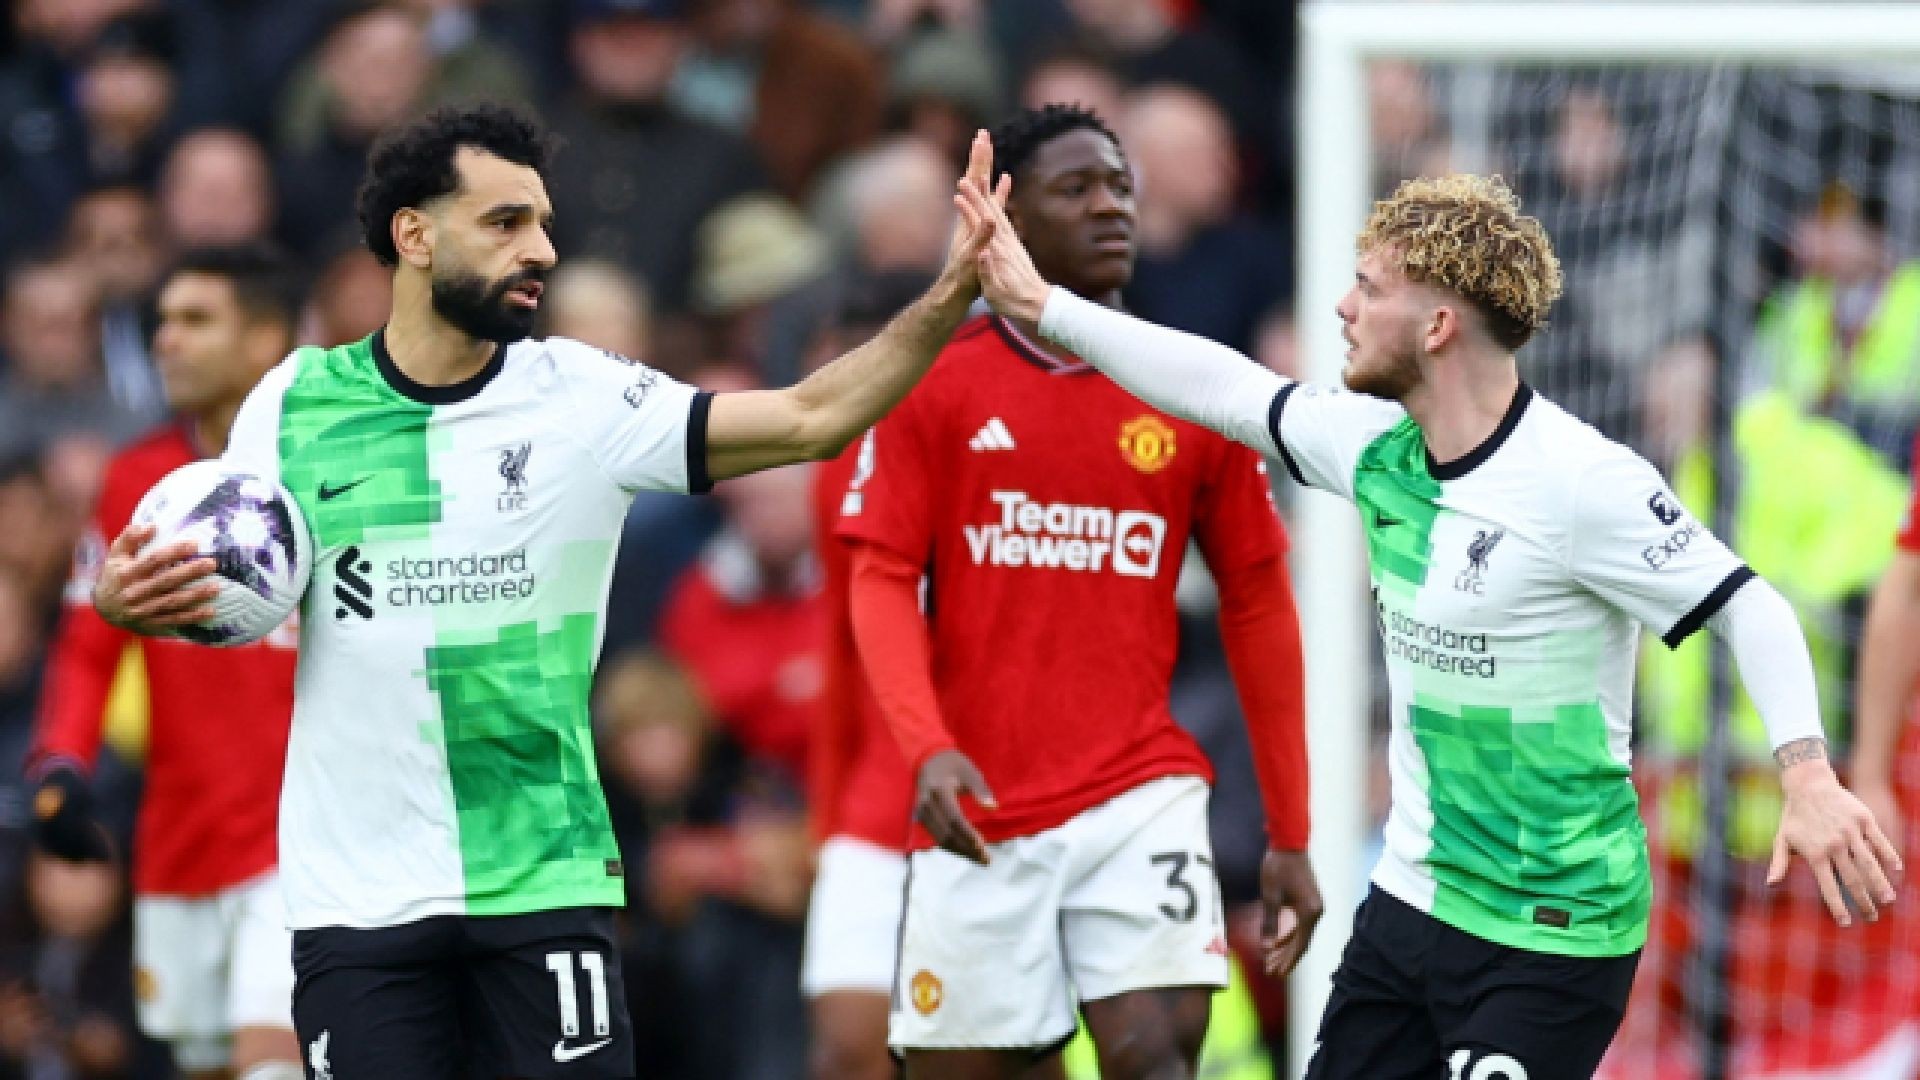 Watch Manchester United vs Liverpool full match replay and highlights